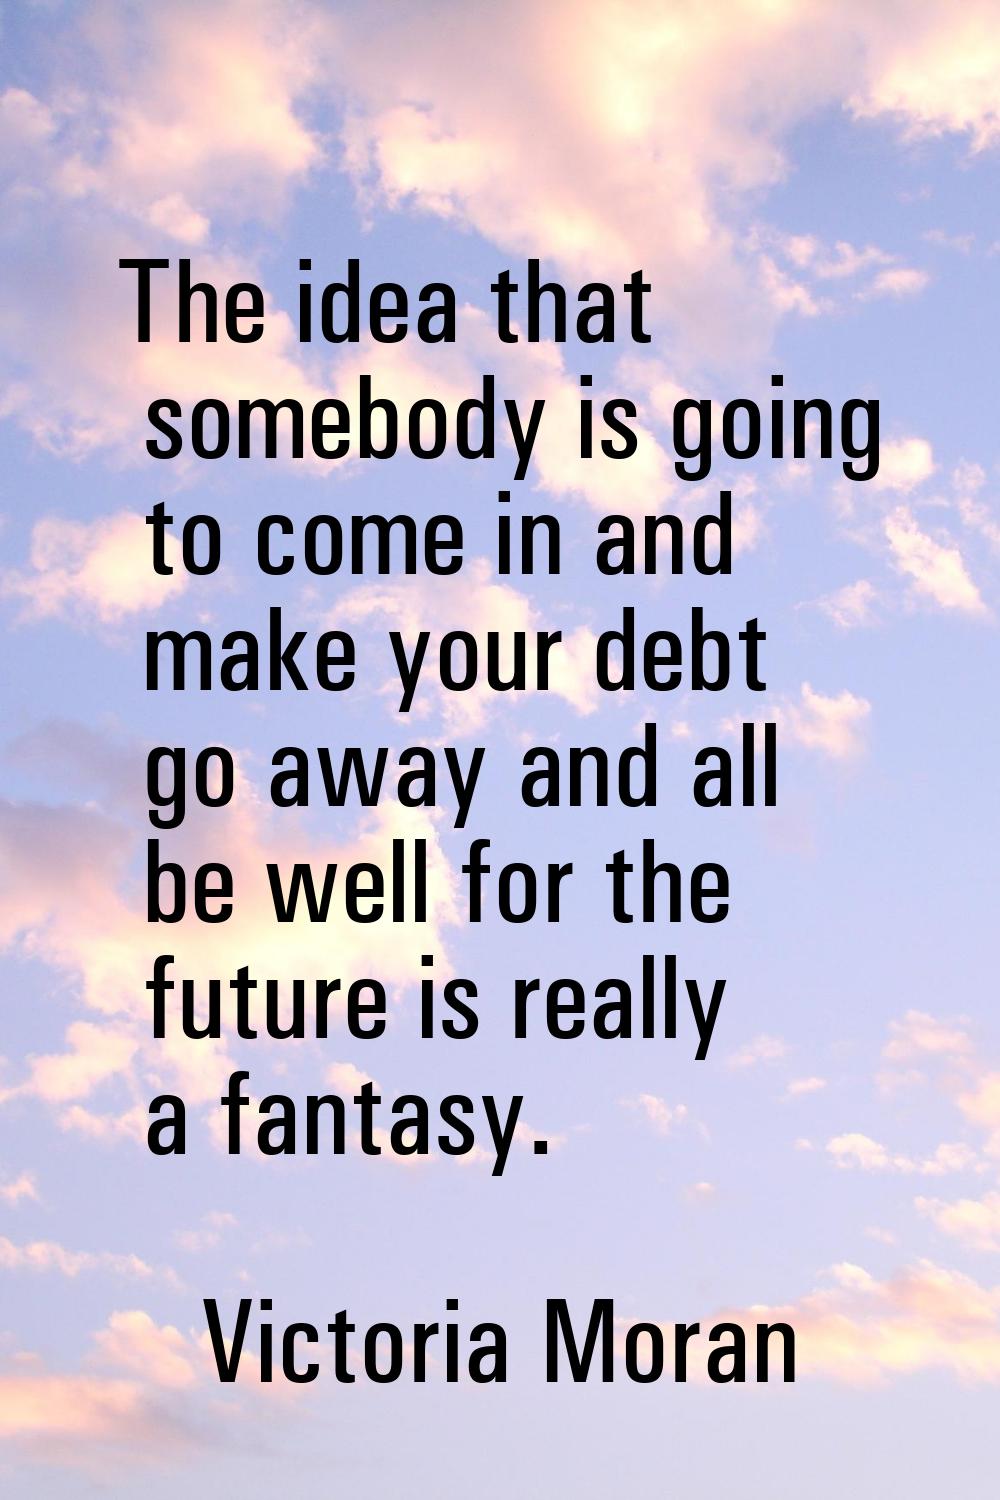 The idea that somebody is going to come in and make your debt go away and all be well for the futur